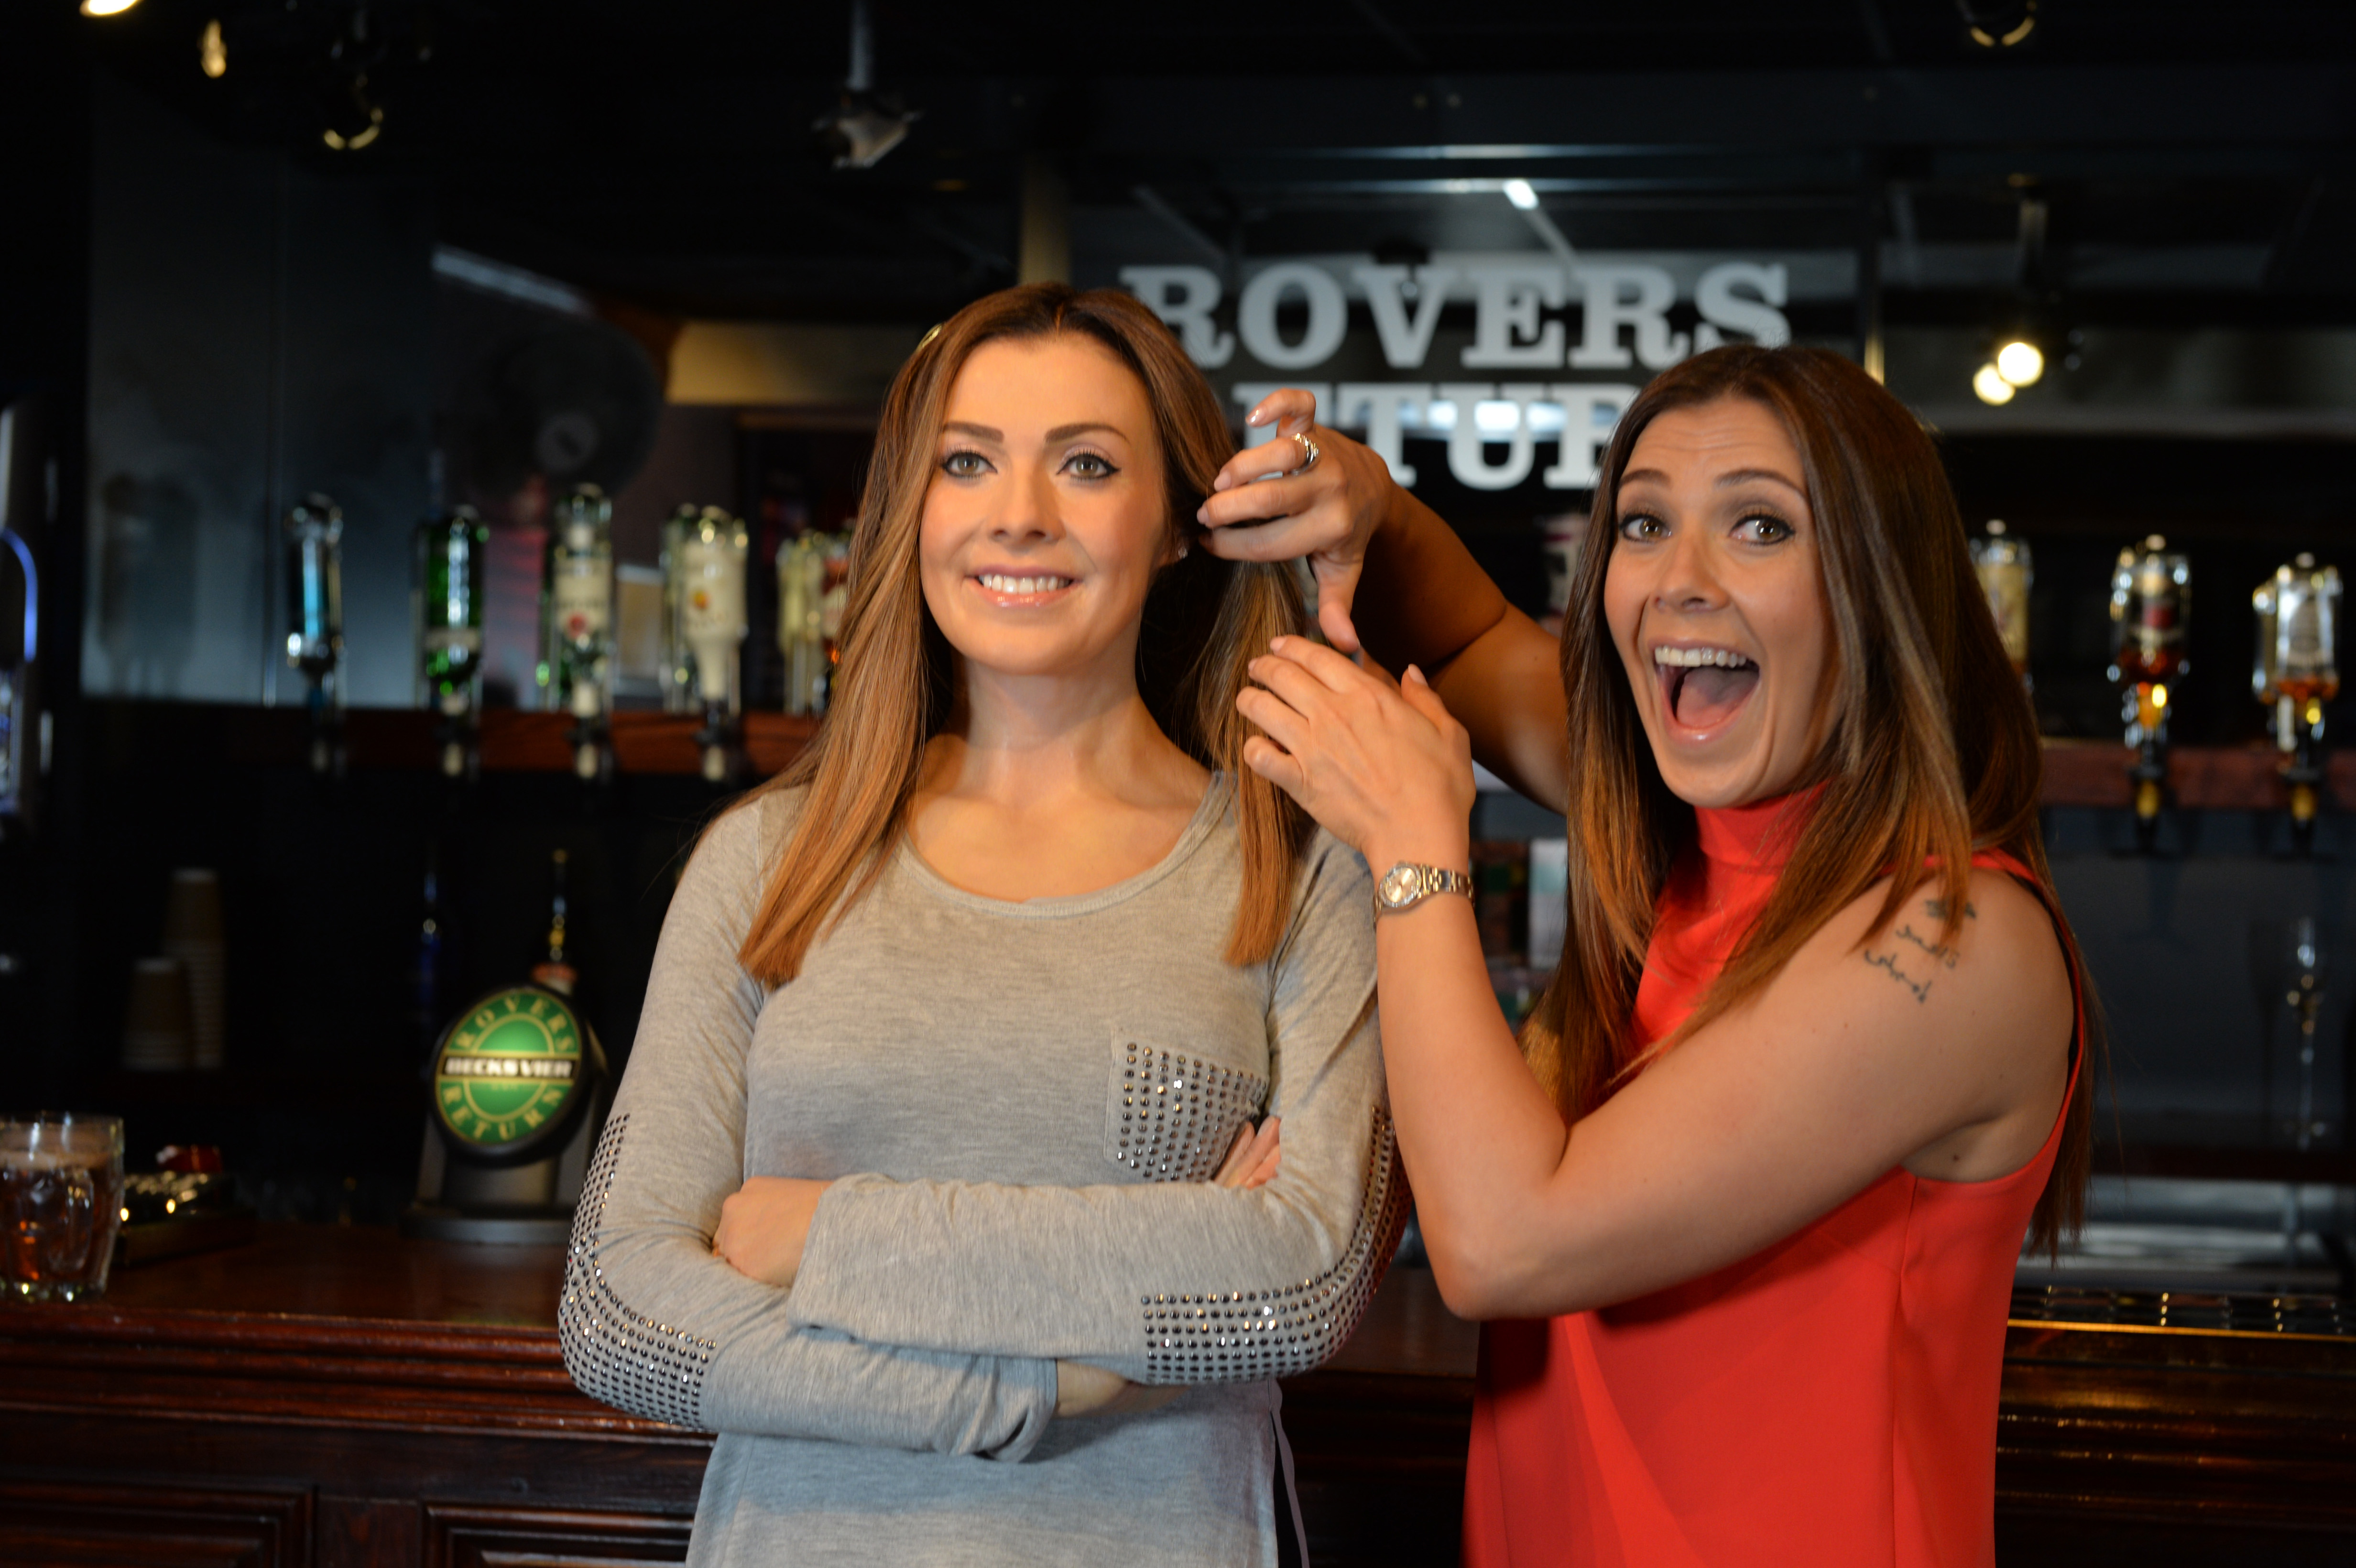 Kym Marsh meets Michelle Connor's wax figure at Madame Tussauds Blackpool in Rovers Return